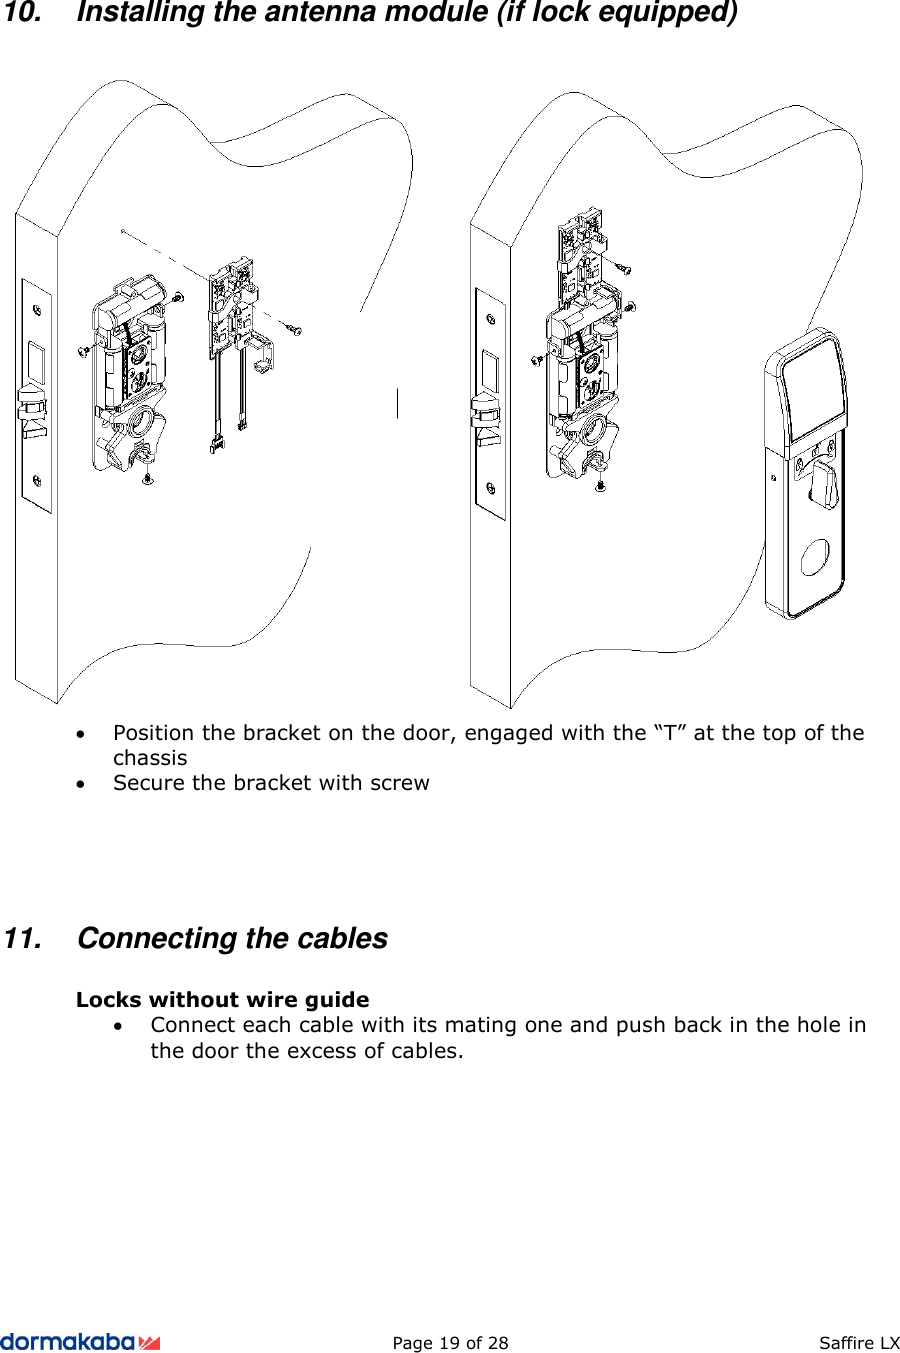          Page 19 of 28  Saffire LX      10.  Installing the antenna module (if lock equipped)     • Position the bracket on the door, engaged with the “T” at the top of the chassis • Secure the bracket with screw     11.  Connecting the cables  Locks without wire guide • Connect each cable with its mating one and push back in the hole in the door the excess of cables.          